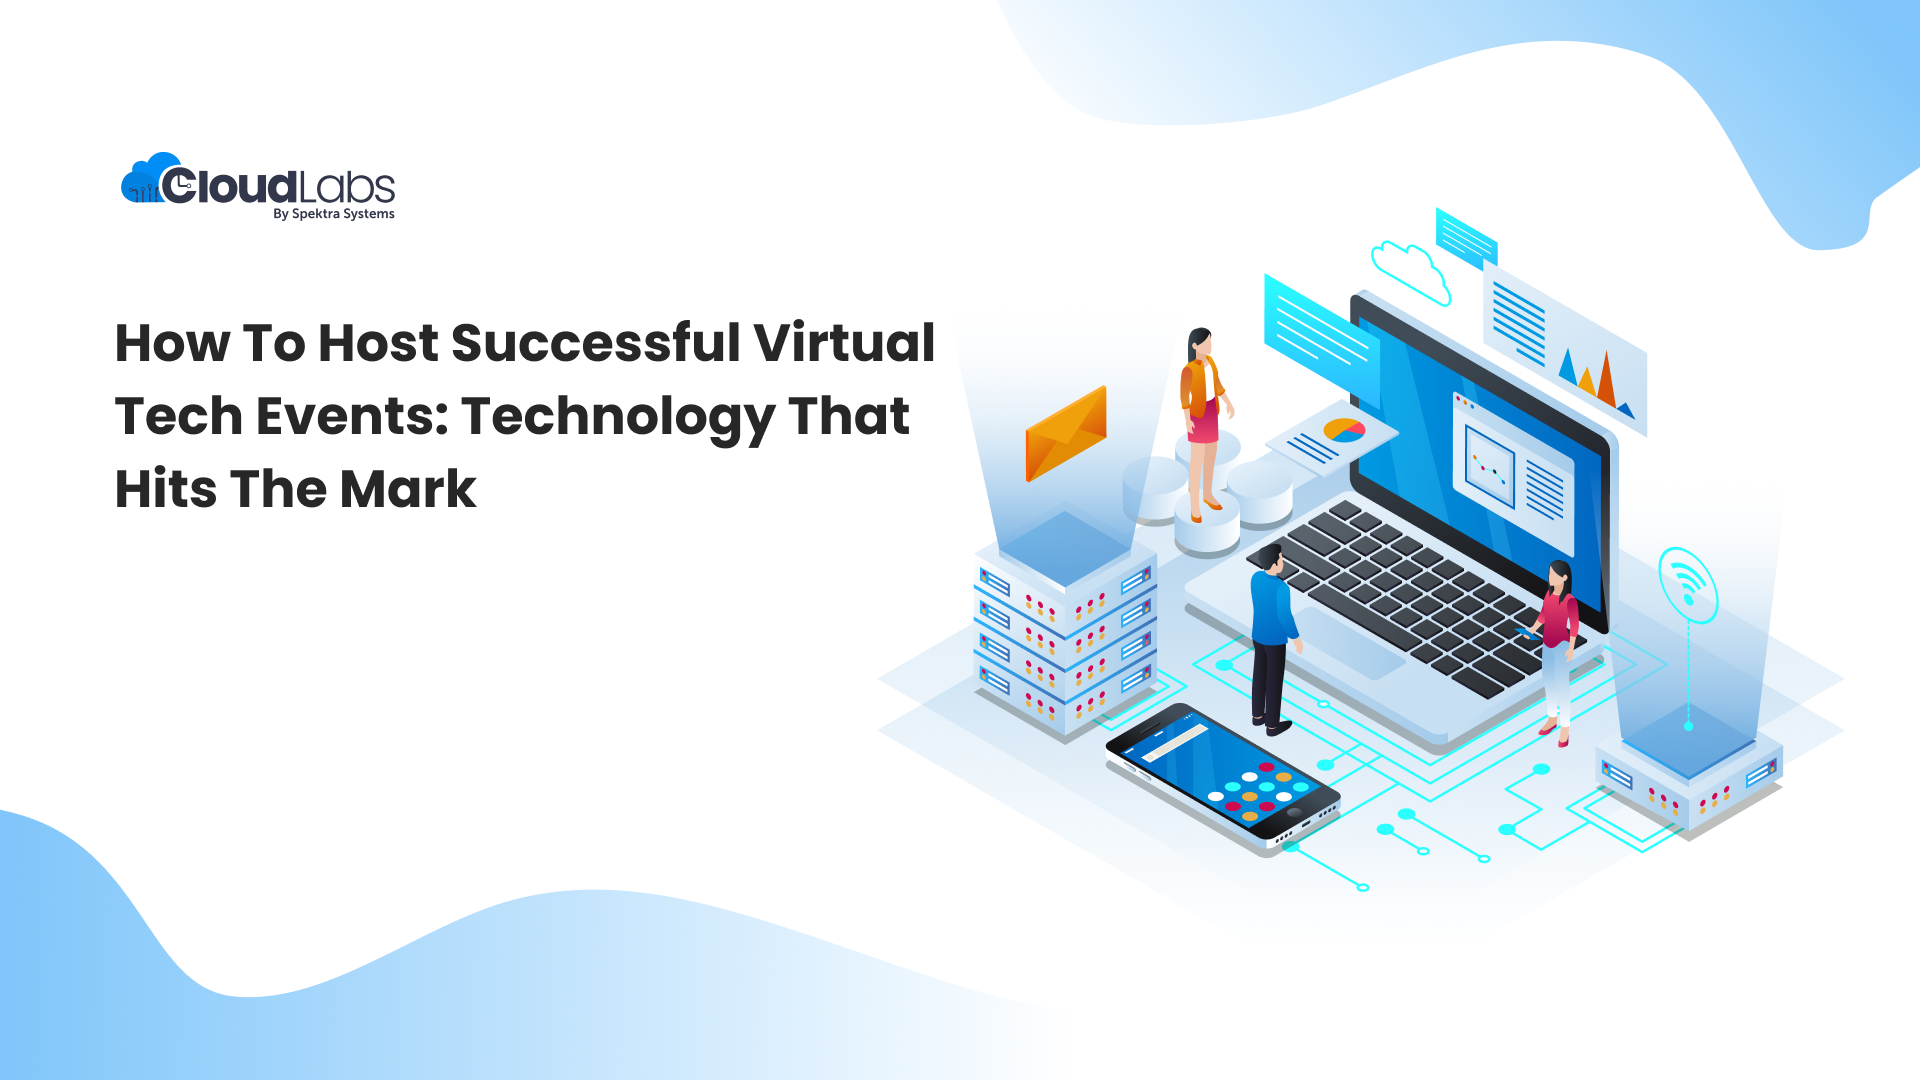 How to host successful virtual tech events: Technology that hits the mark